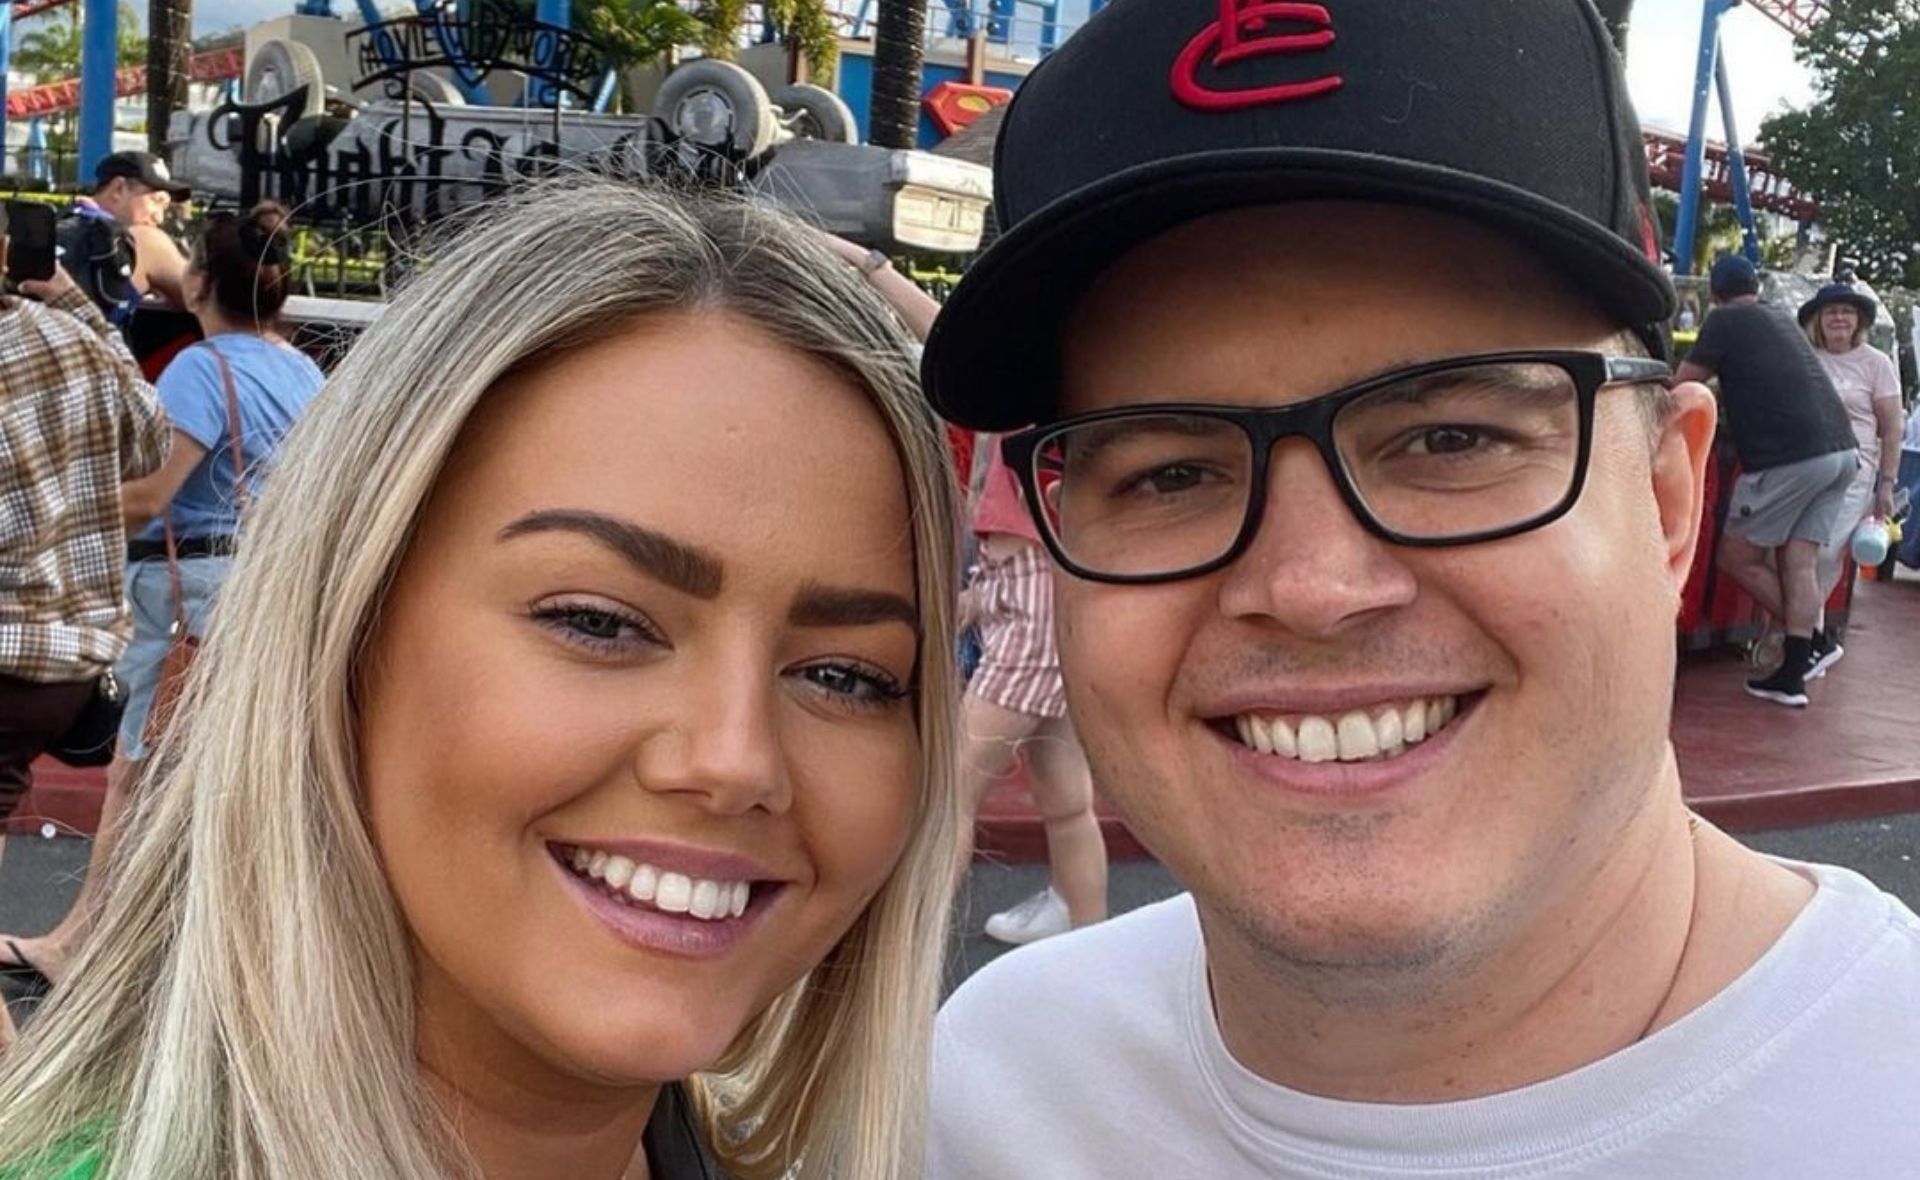 EXCLUSIVE: “She wants to make me smile”: Johnny Ruffo says he’d “be lost” without his girlfriend Tahnee Sims